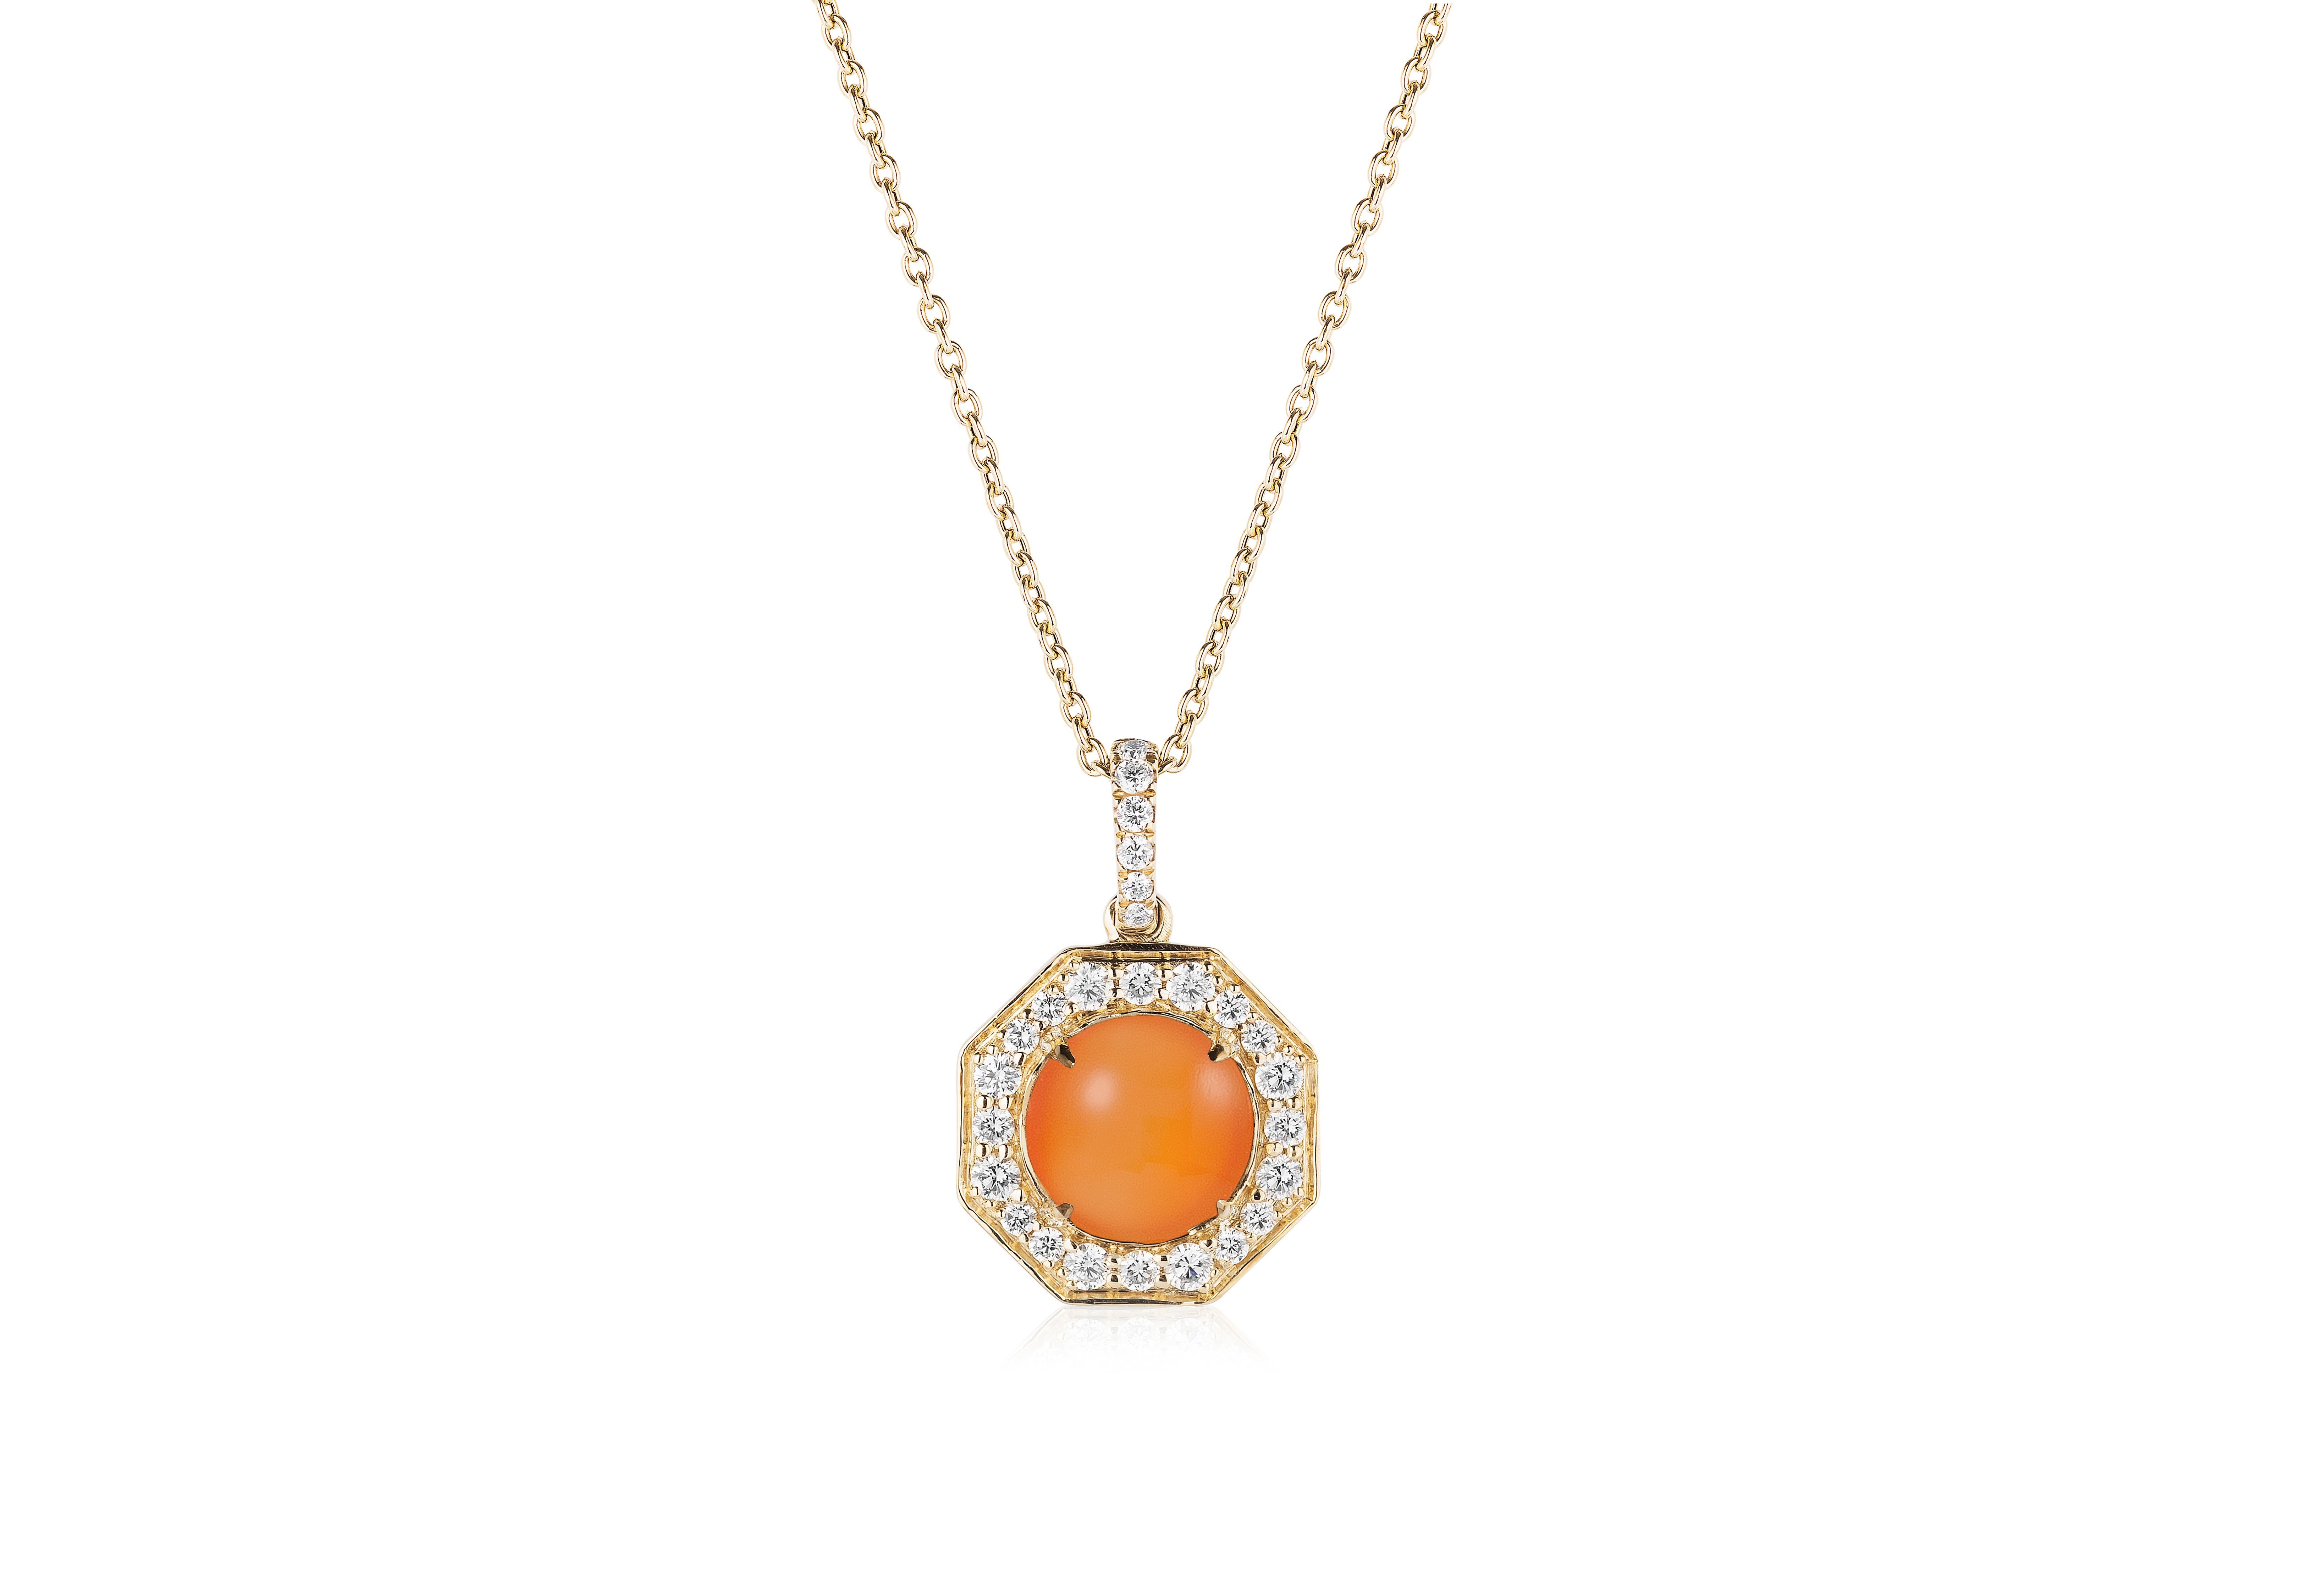 Orange Chalcedony Small Pendant with Diamonds in 18K Yellow Gold, from 'Rock 'N Roll' Collection.

Stone Size: 8 mm

Approx. Stone Wt: 2.54 Carats (Orange Chalcedony)

Diamonds: G-H / VS, Approx. Wt: 0.36 Carats 